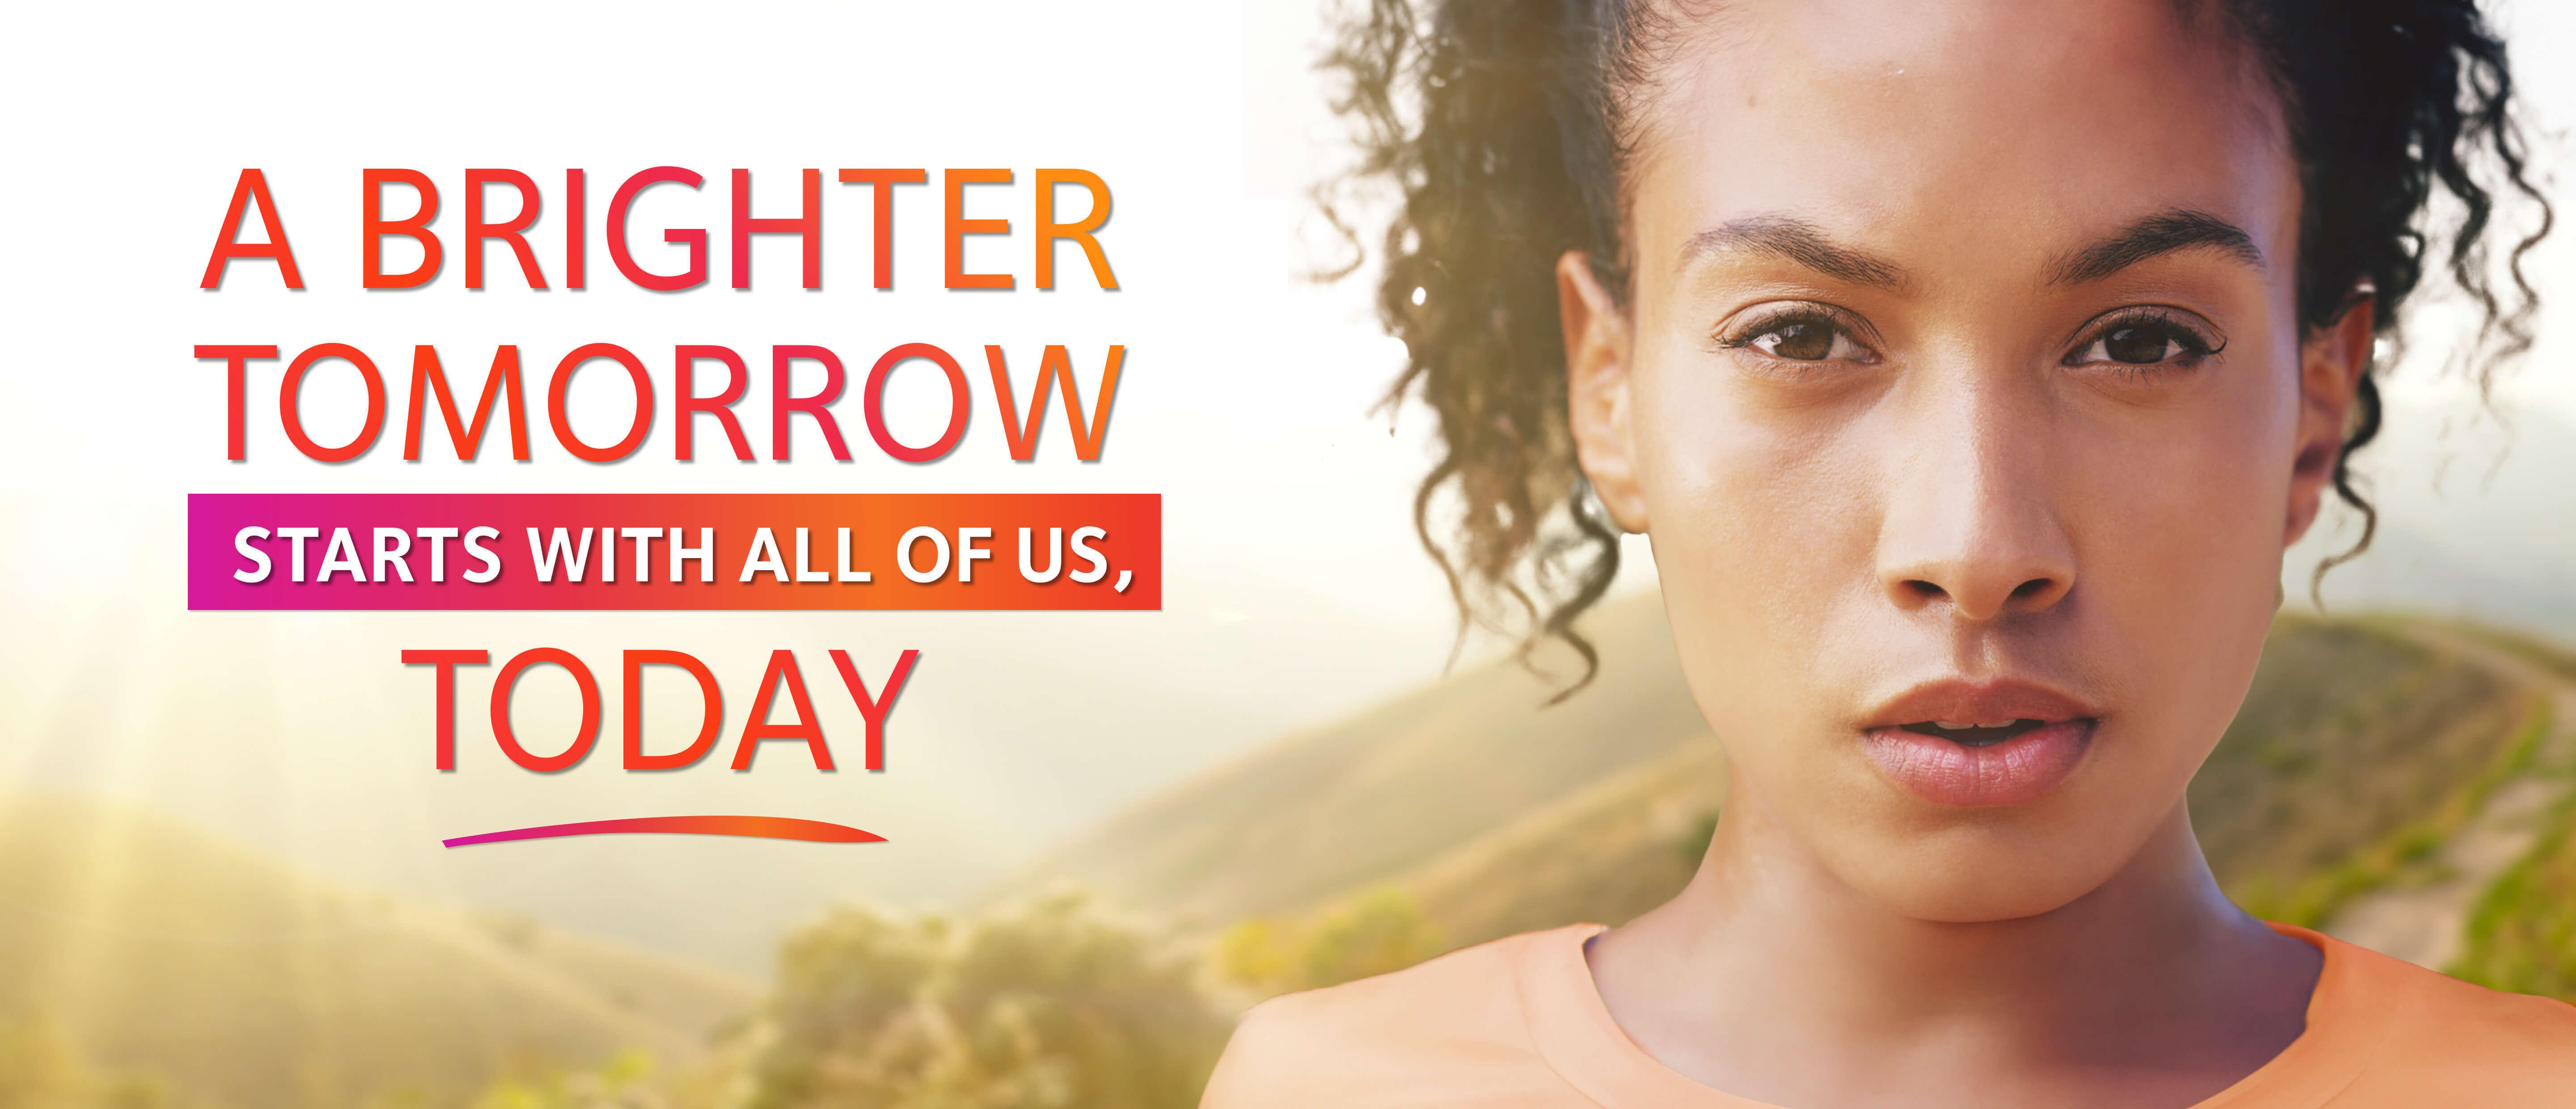 a brighter tomorrow starts with all of us today